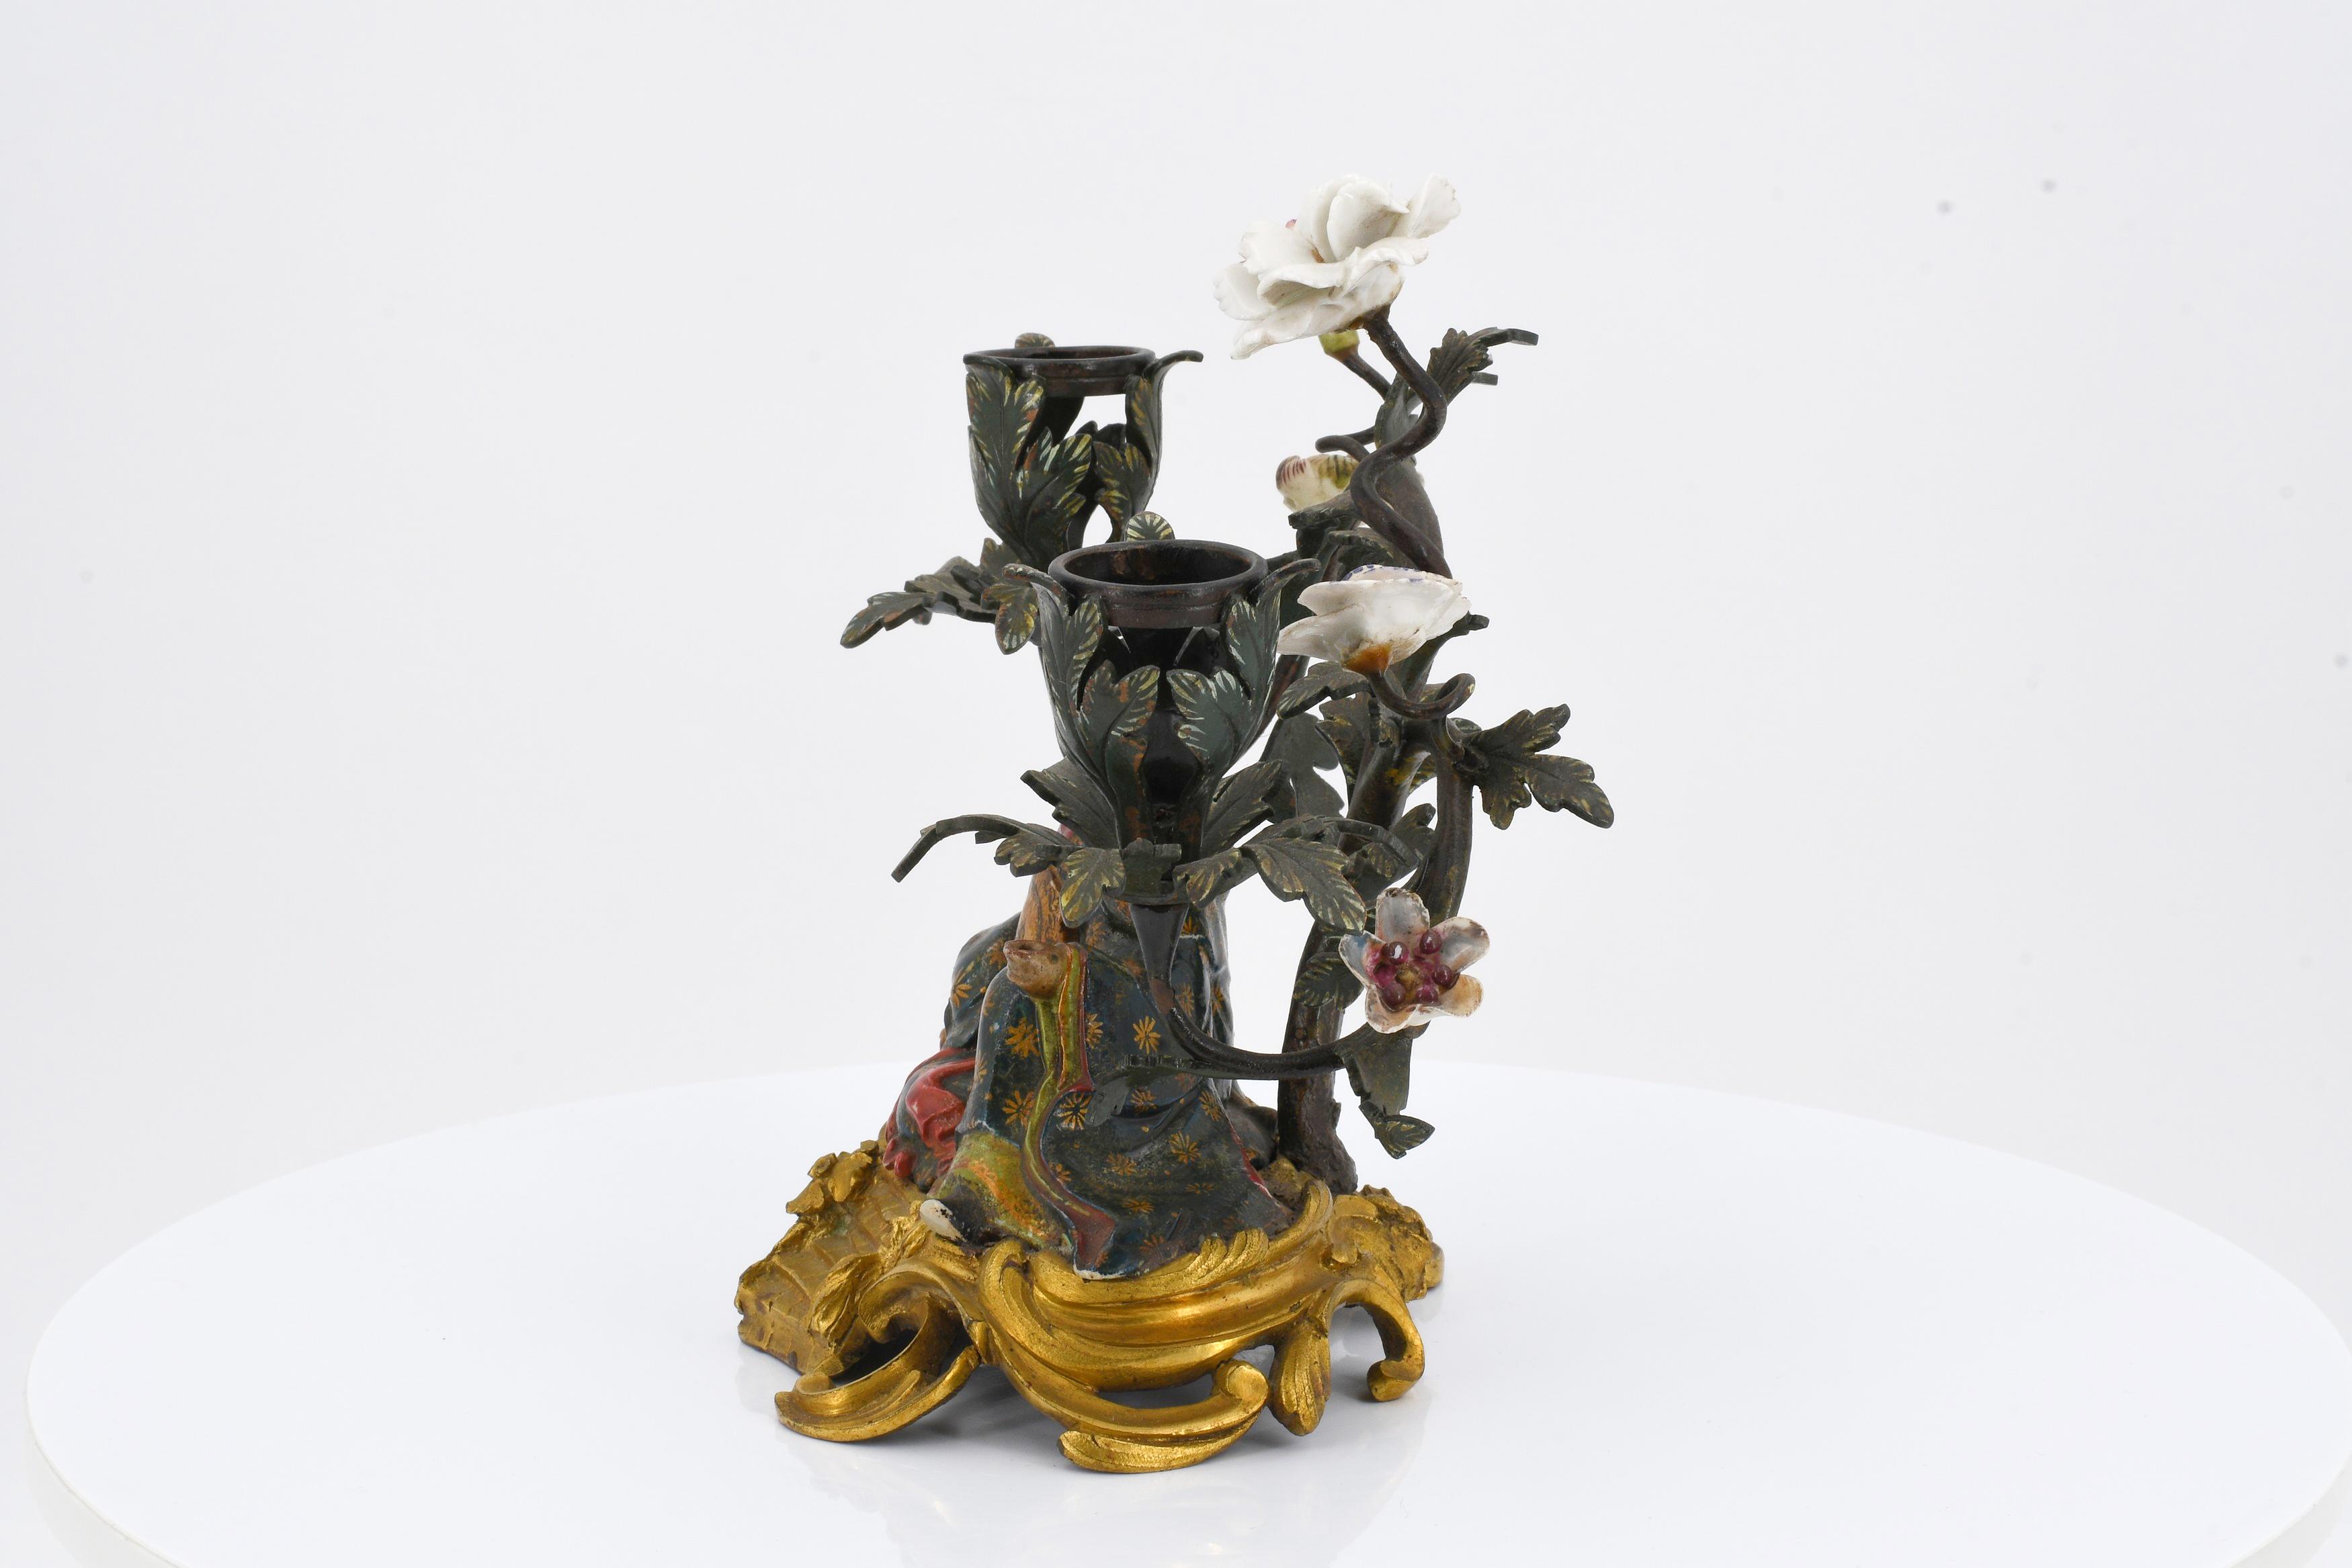 Pair of candelabra with Chinese figurines - Image 7 of 11